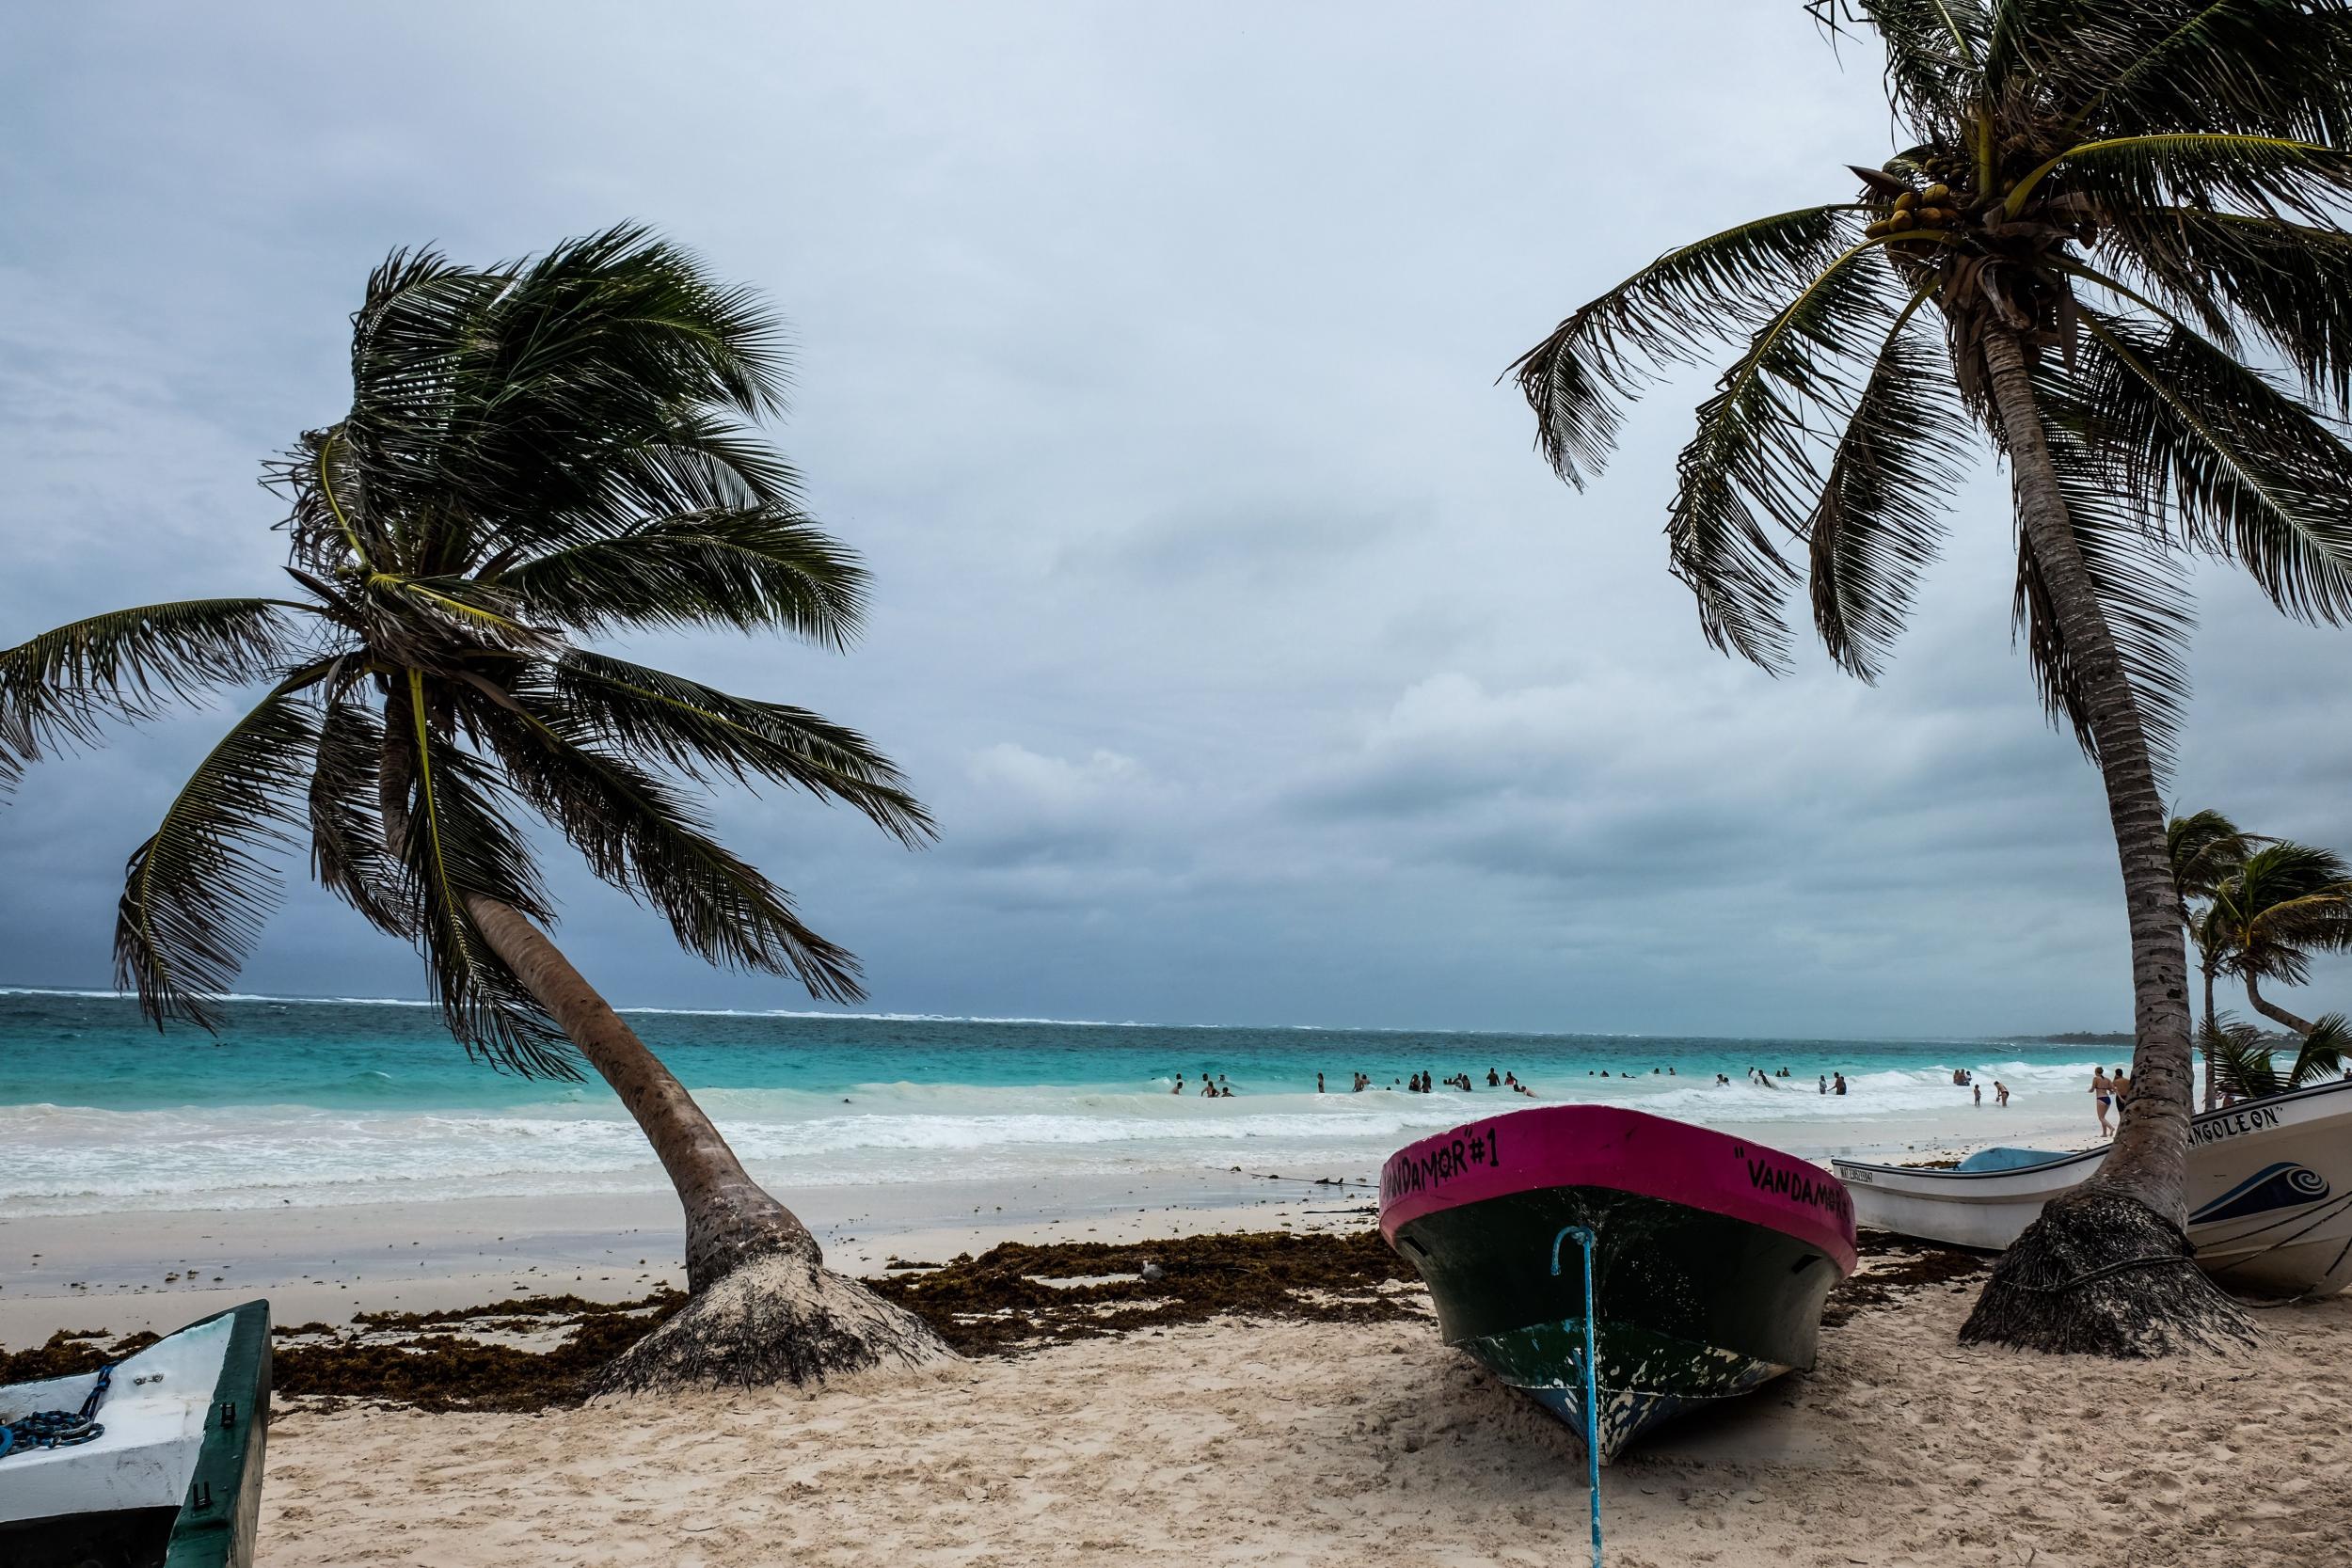 Stormy times for Tulum... or not, says writer Liz Dodd